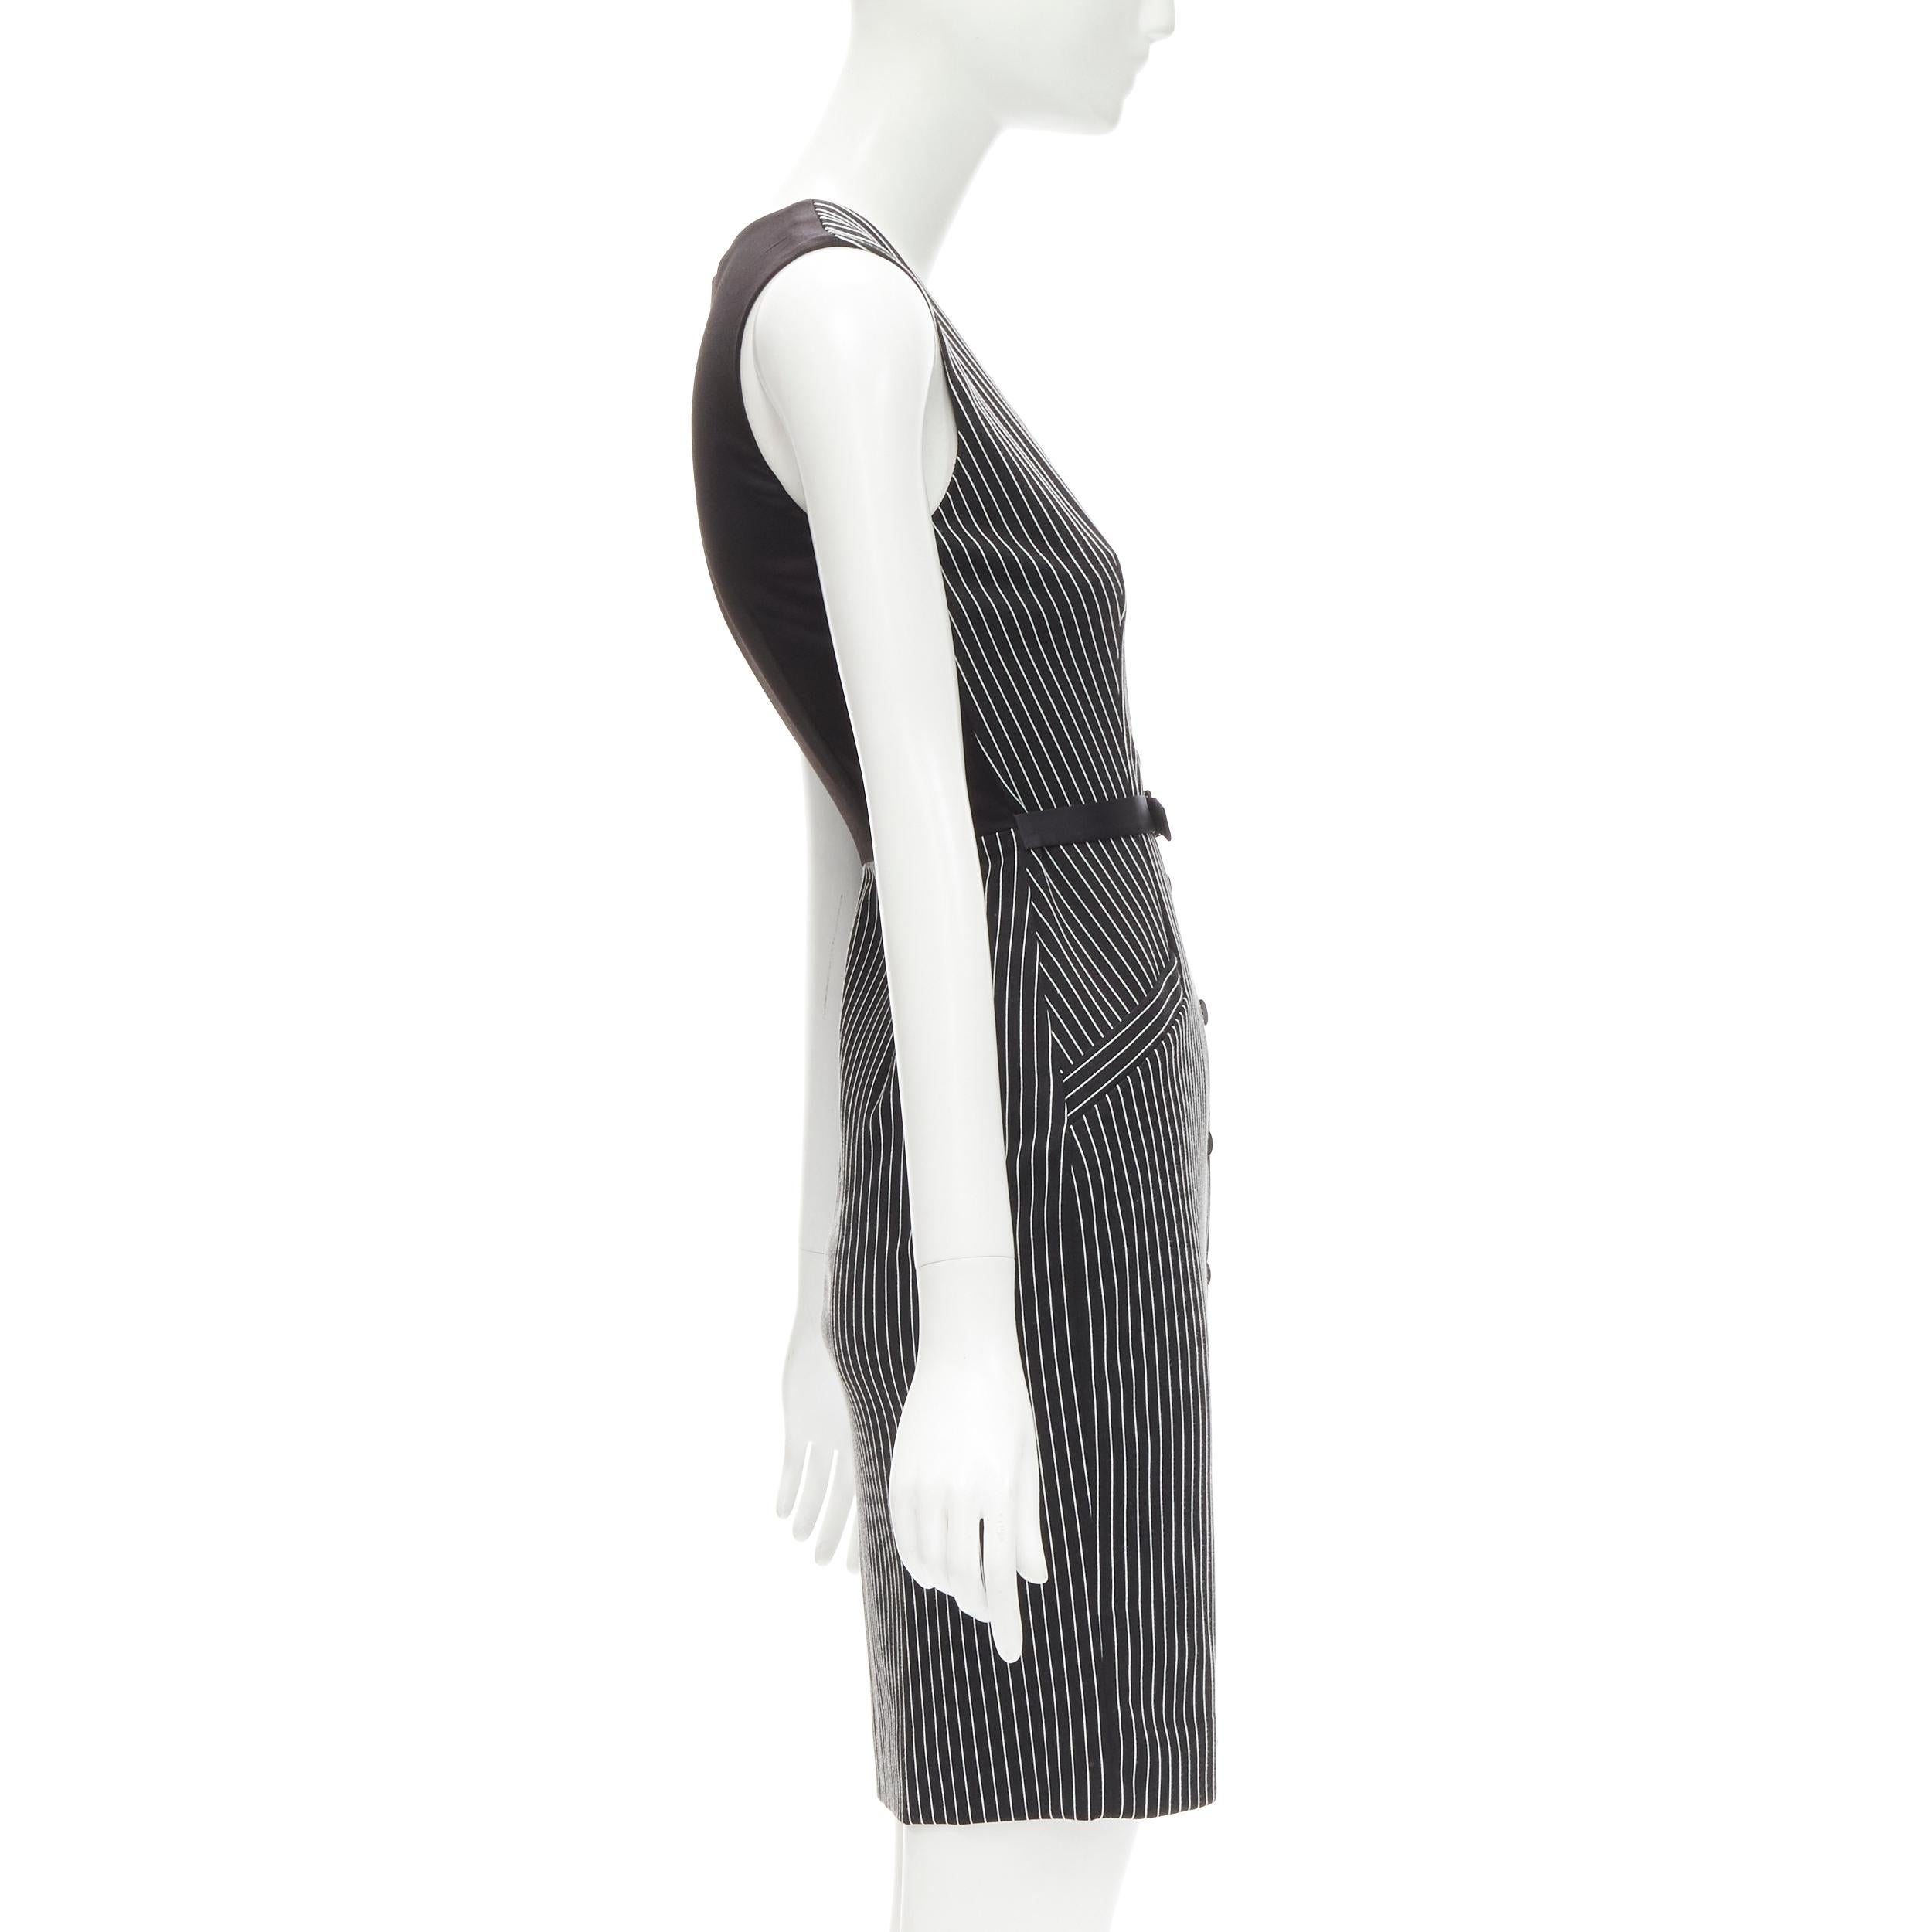 DIANE VON FURSTENBERG Gilet Dress black white vertical pinstripes dress US0 XS In Excellent Condition For Sale In Hong Kong, NT